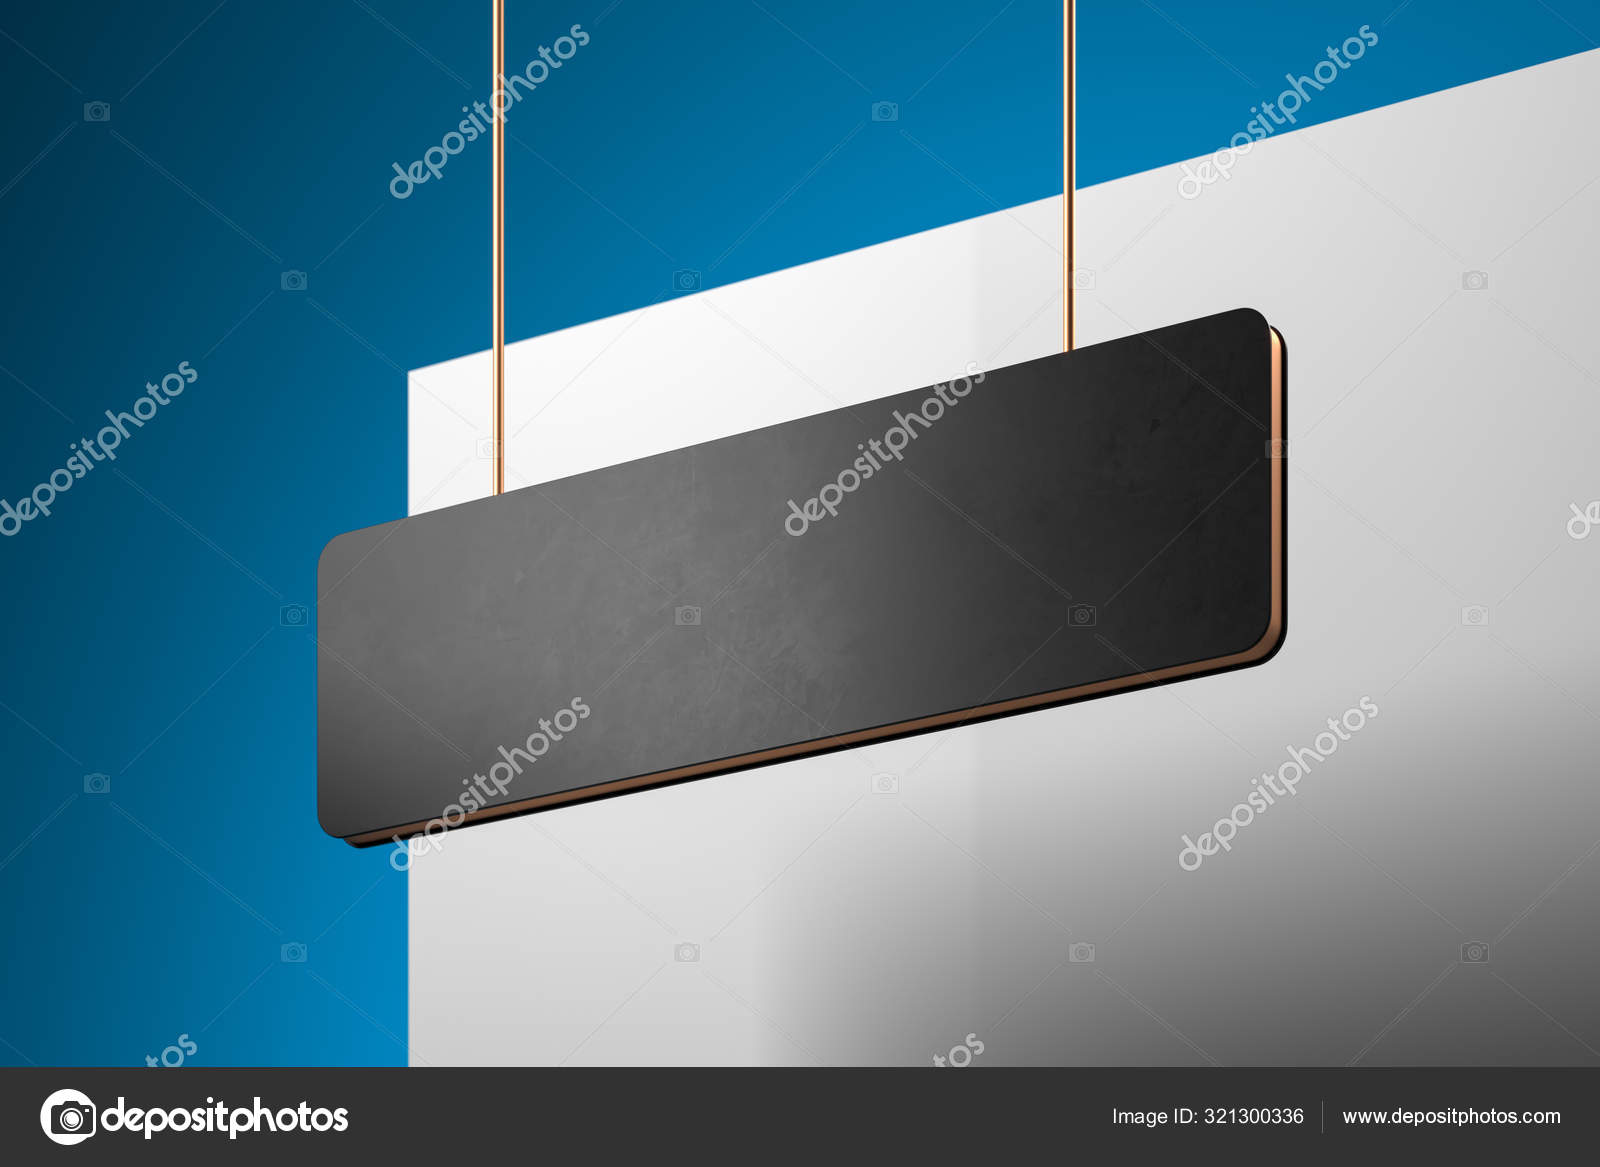 Download Blank Black Signboard Mock Up Empty Signage Template On Abstract Multicolored Background Street Sign 3d Rendering Stock Photo Image By C Ekostsov 321300336